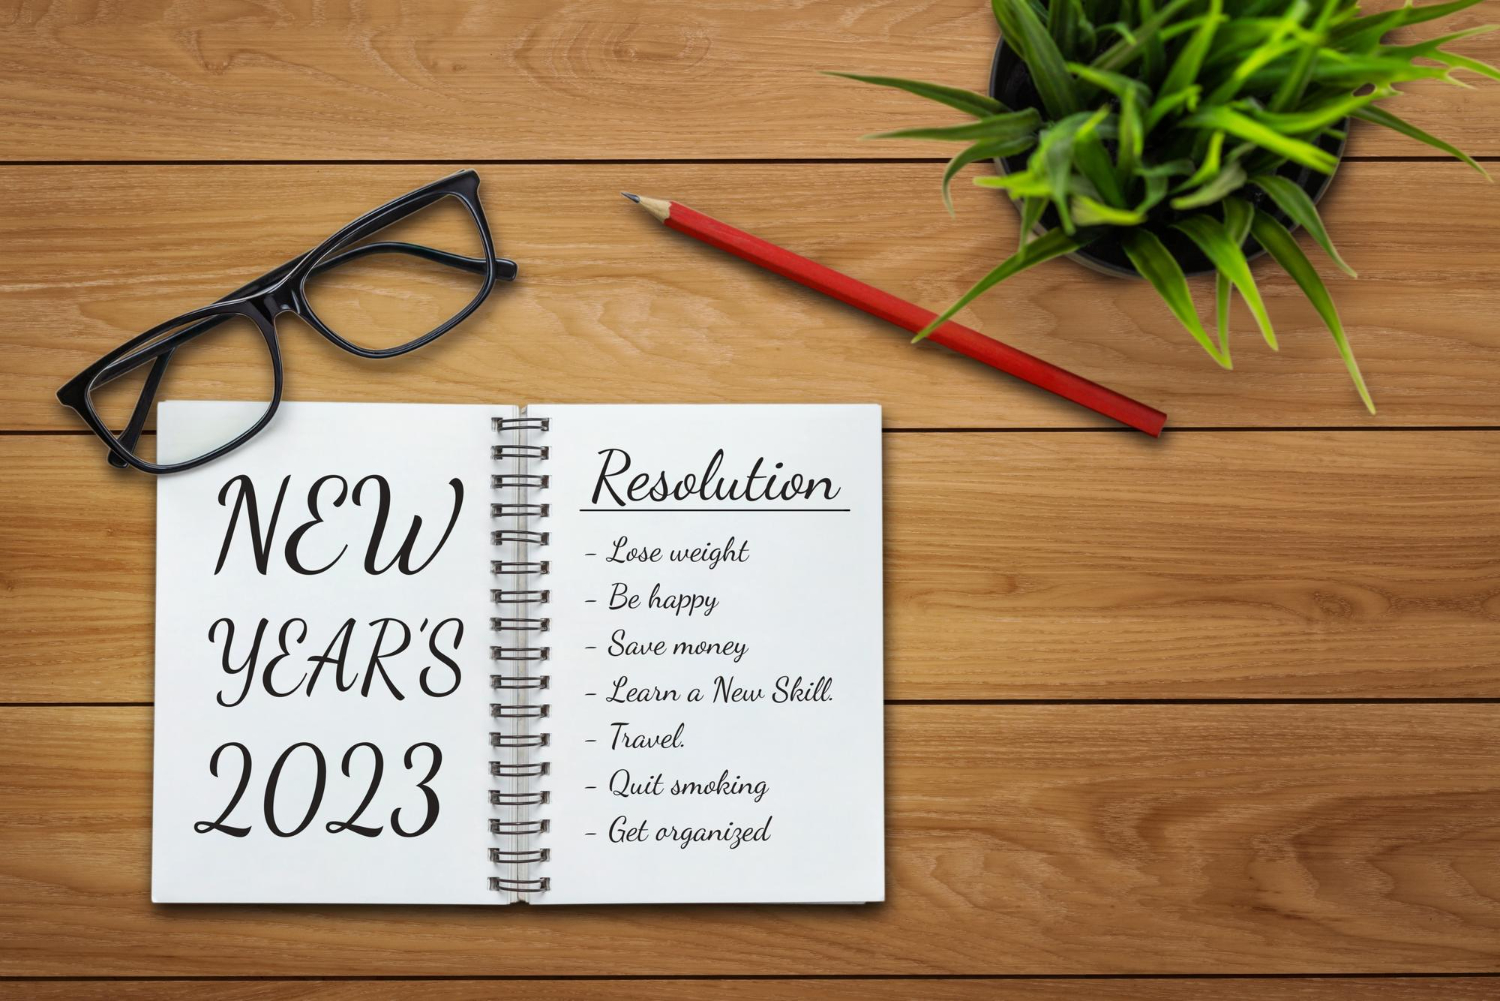 New Year's Resolutions 2023